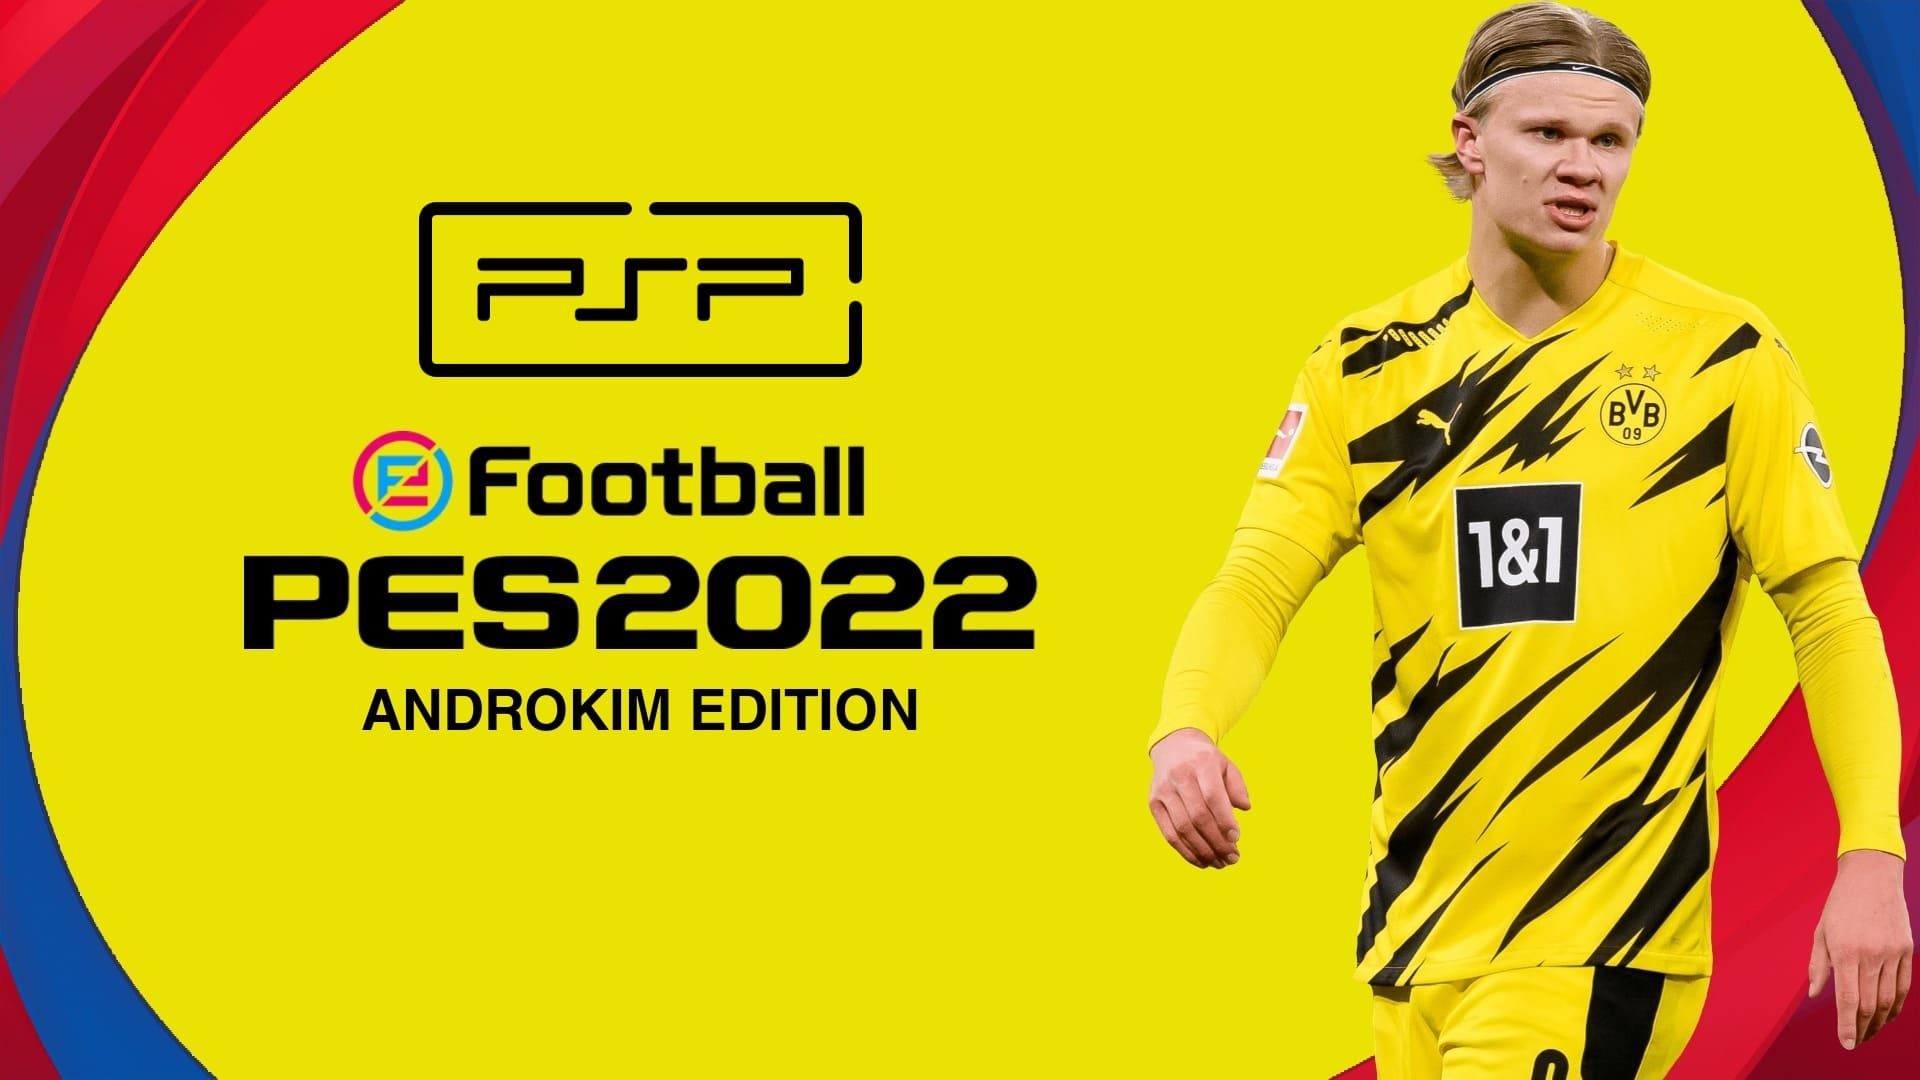 efootball pes 2022 mobile release date